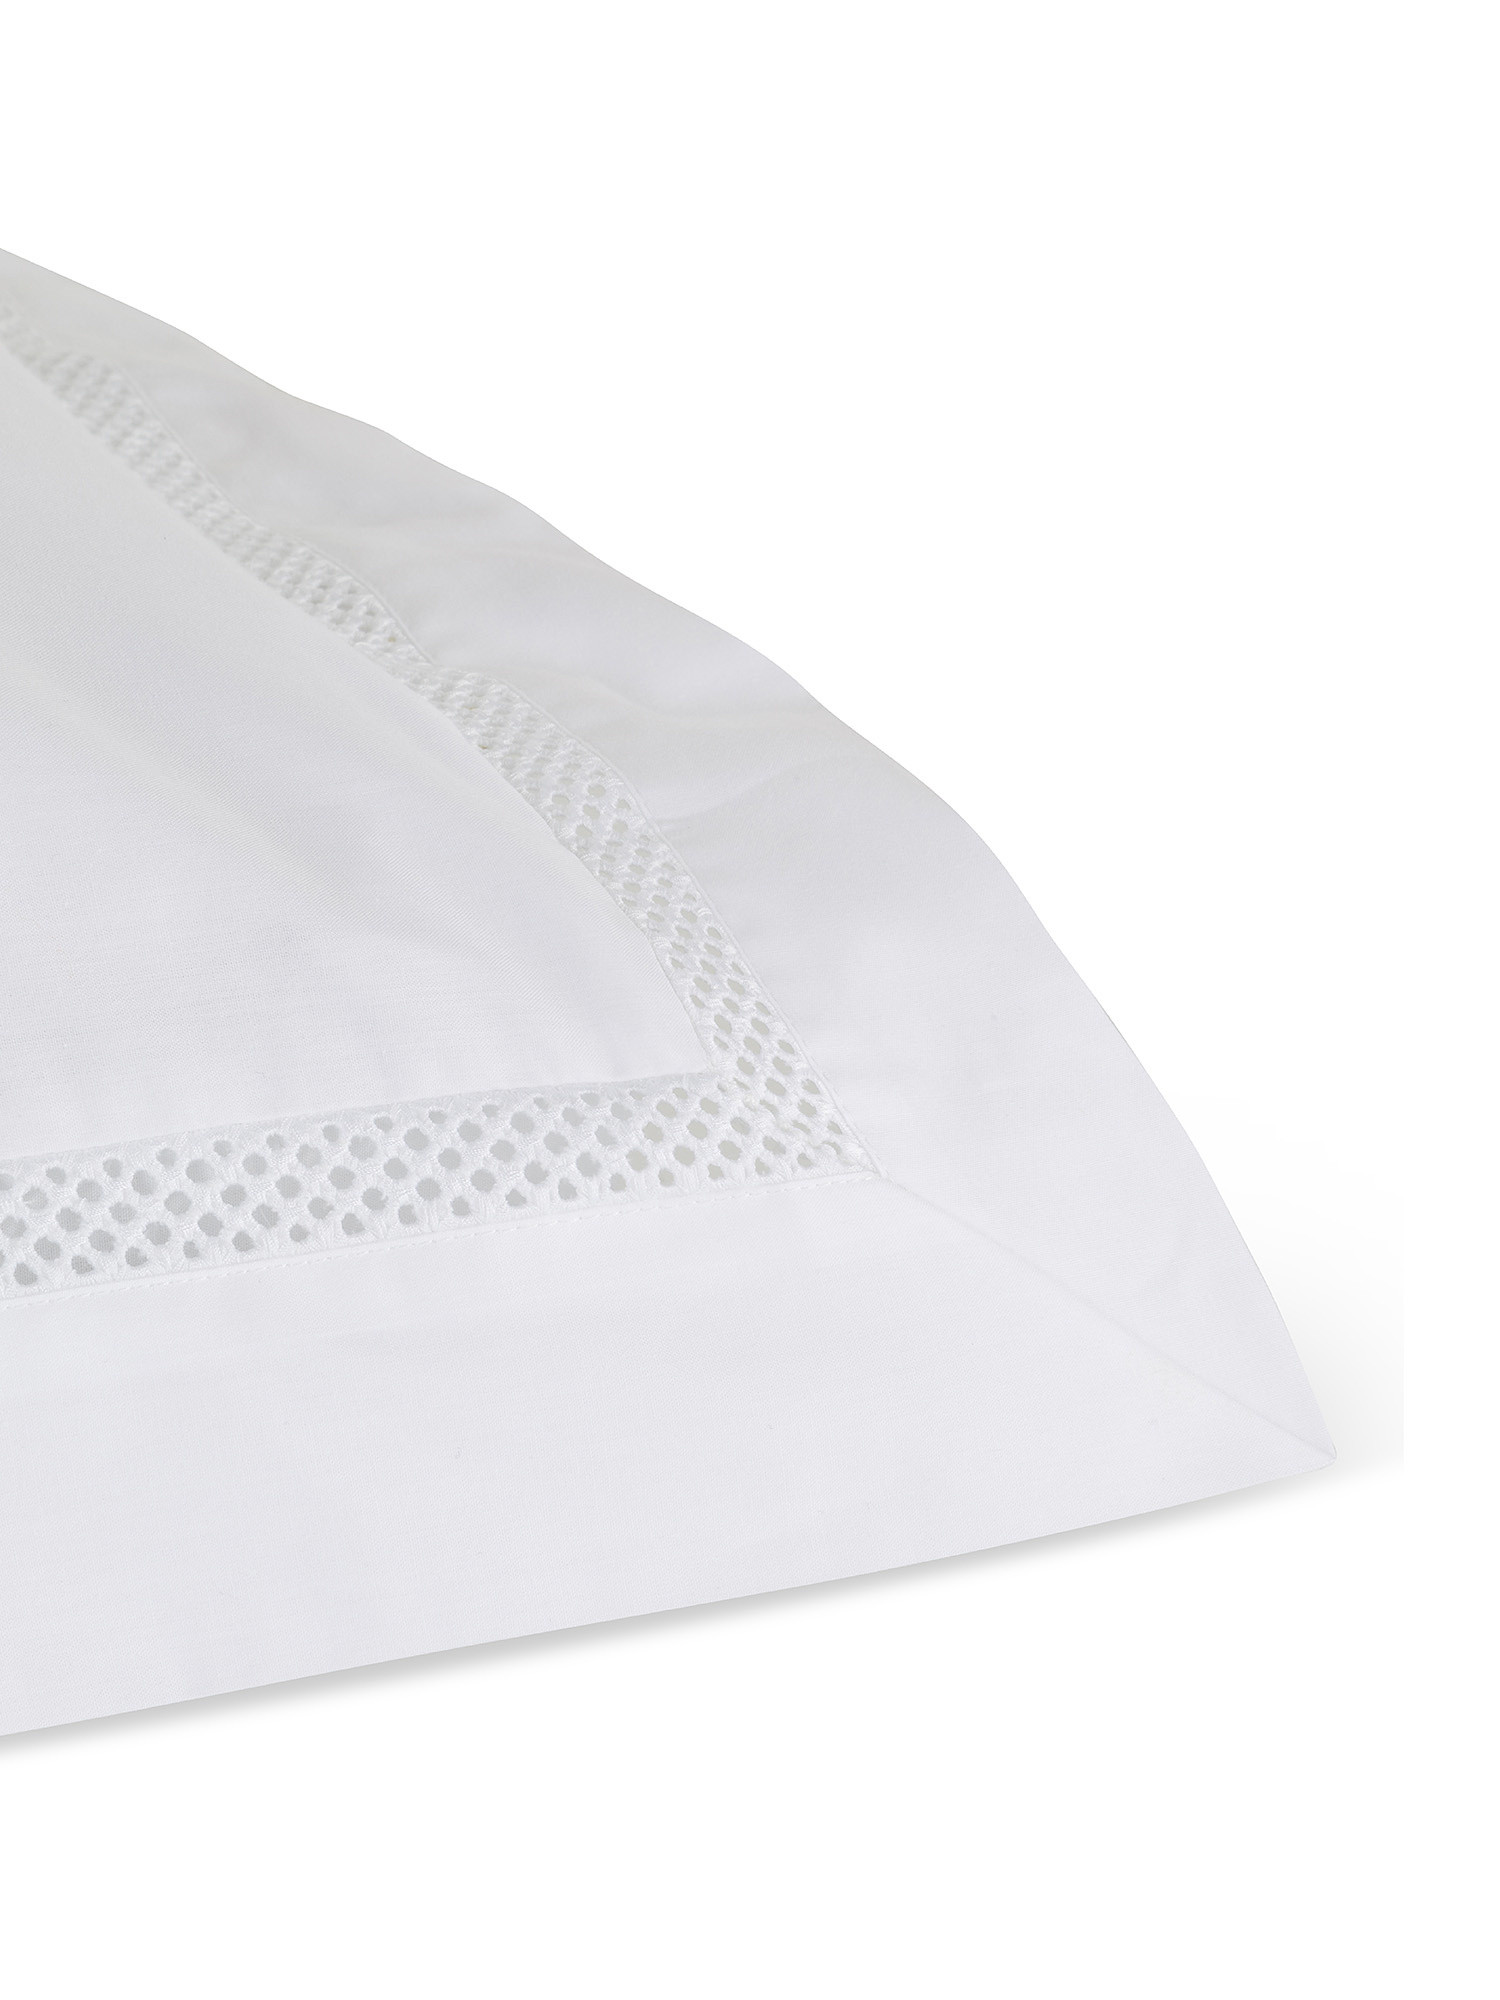 Portofino pillowcase in 100% cotton percale with drawn thread work, White, large image number 1